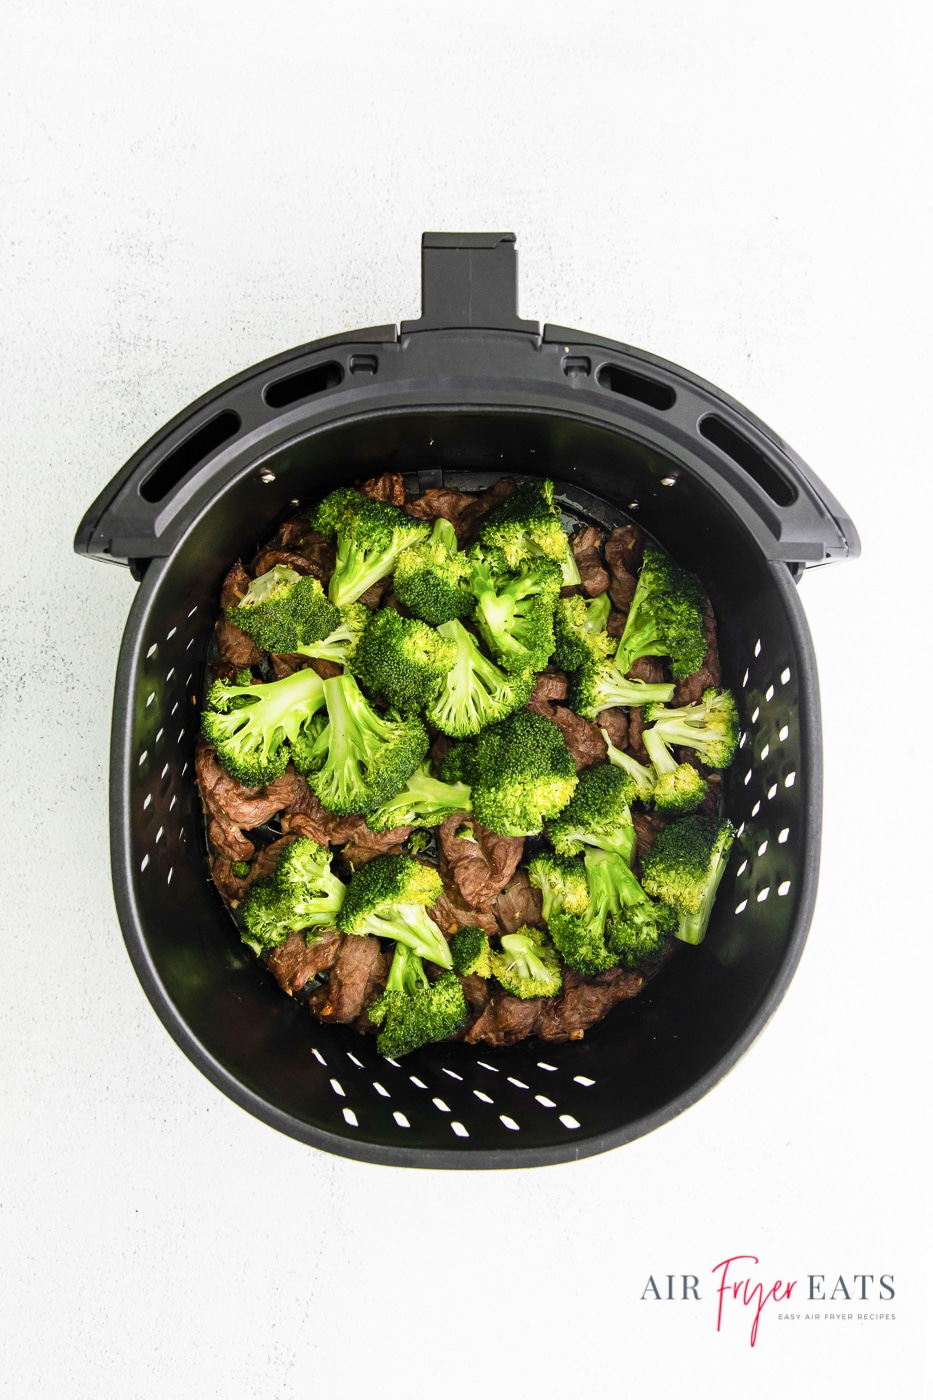 Overhead shot looking down into a black air fryer basket containing cooked beef and broccoli. To the bottom right underneath the basket is the website logo.